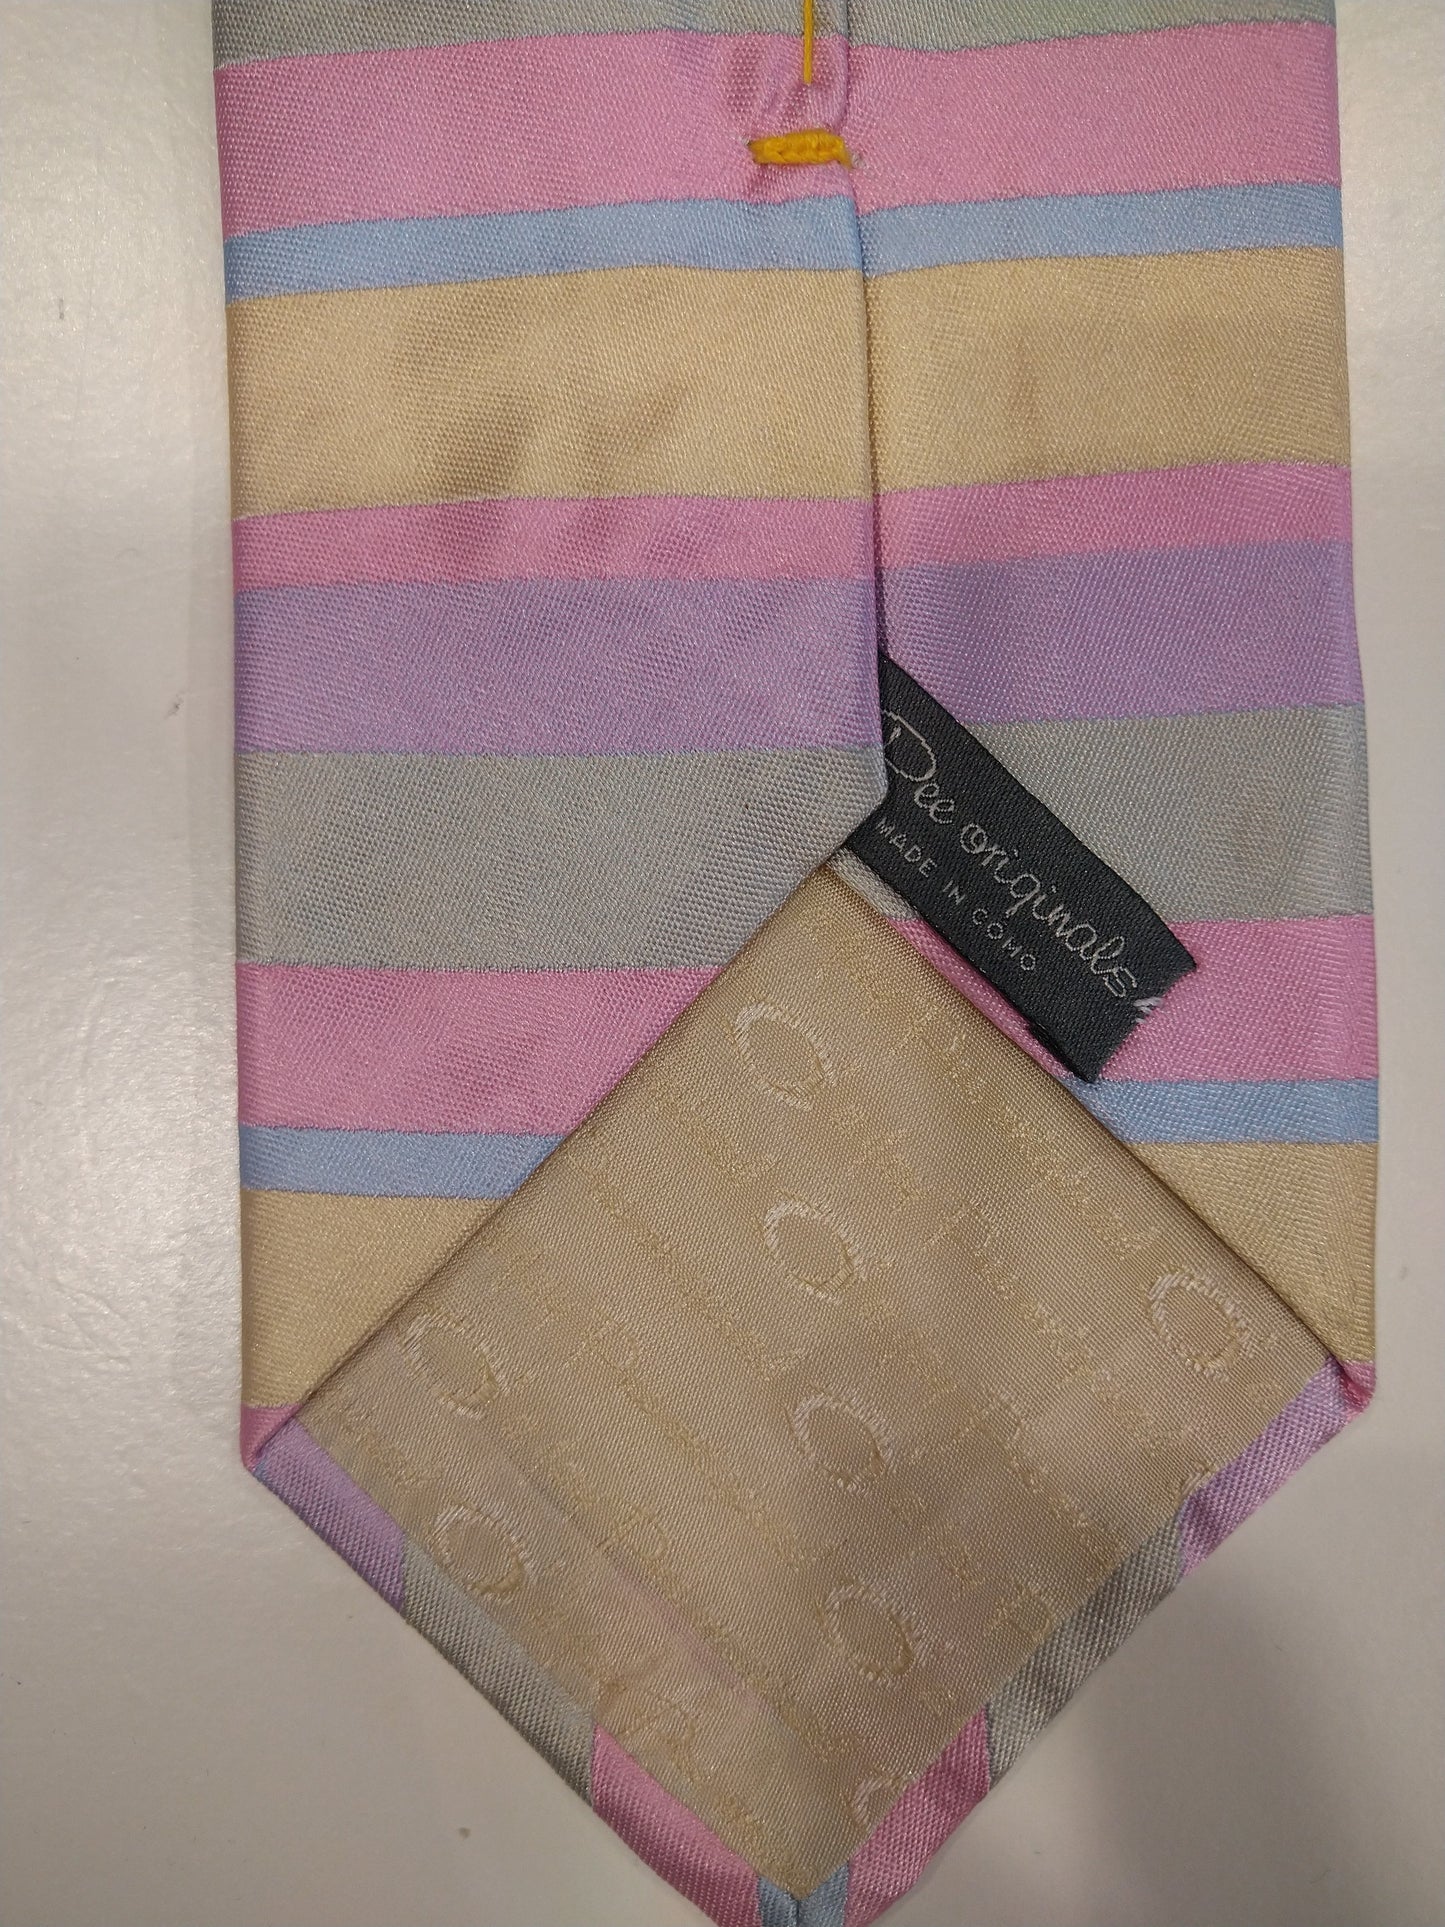 Jay Pee's hand made in como silk tie. Pink / purple / blue / yellow striped.